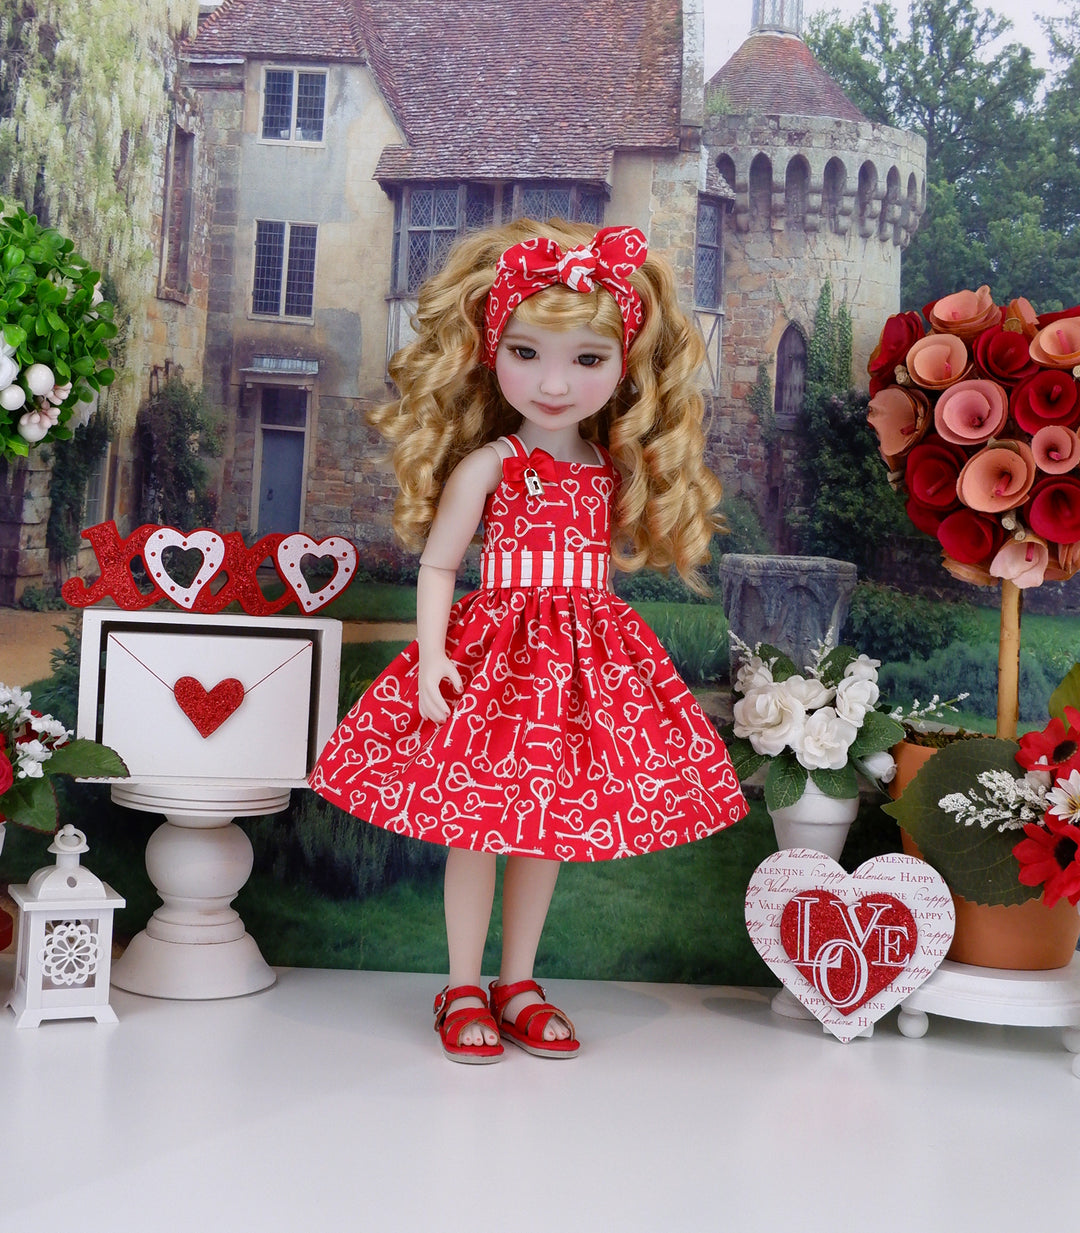 Key to Love - dress with shoes for Ruby Red Fashion Friends doll